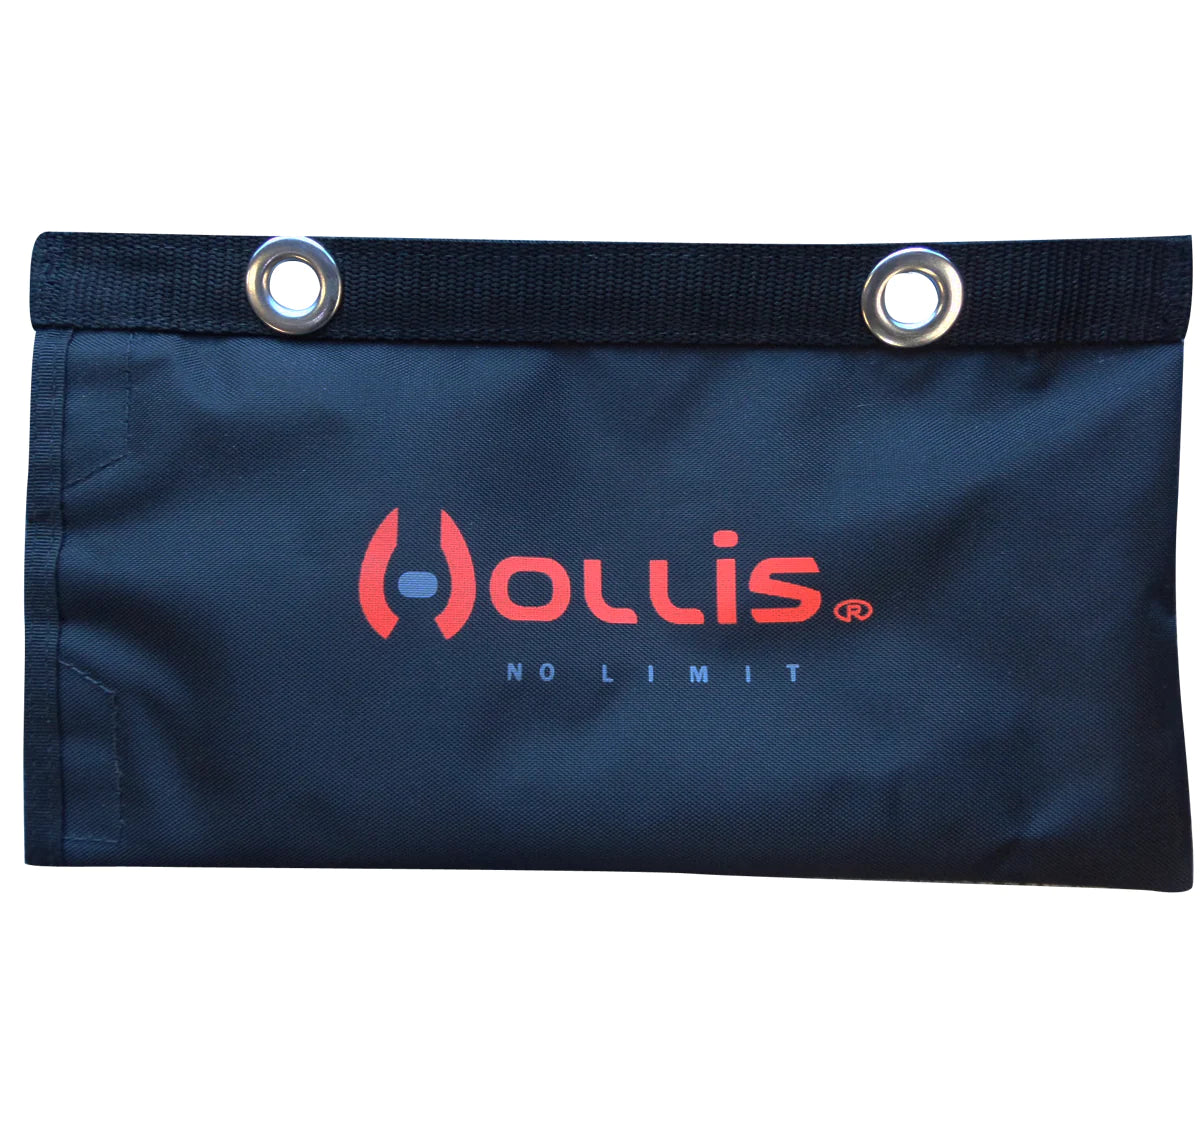 Hollis SMB with Sling Pouch